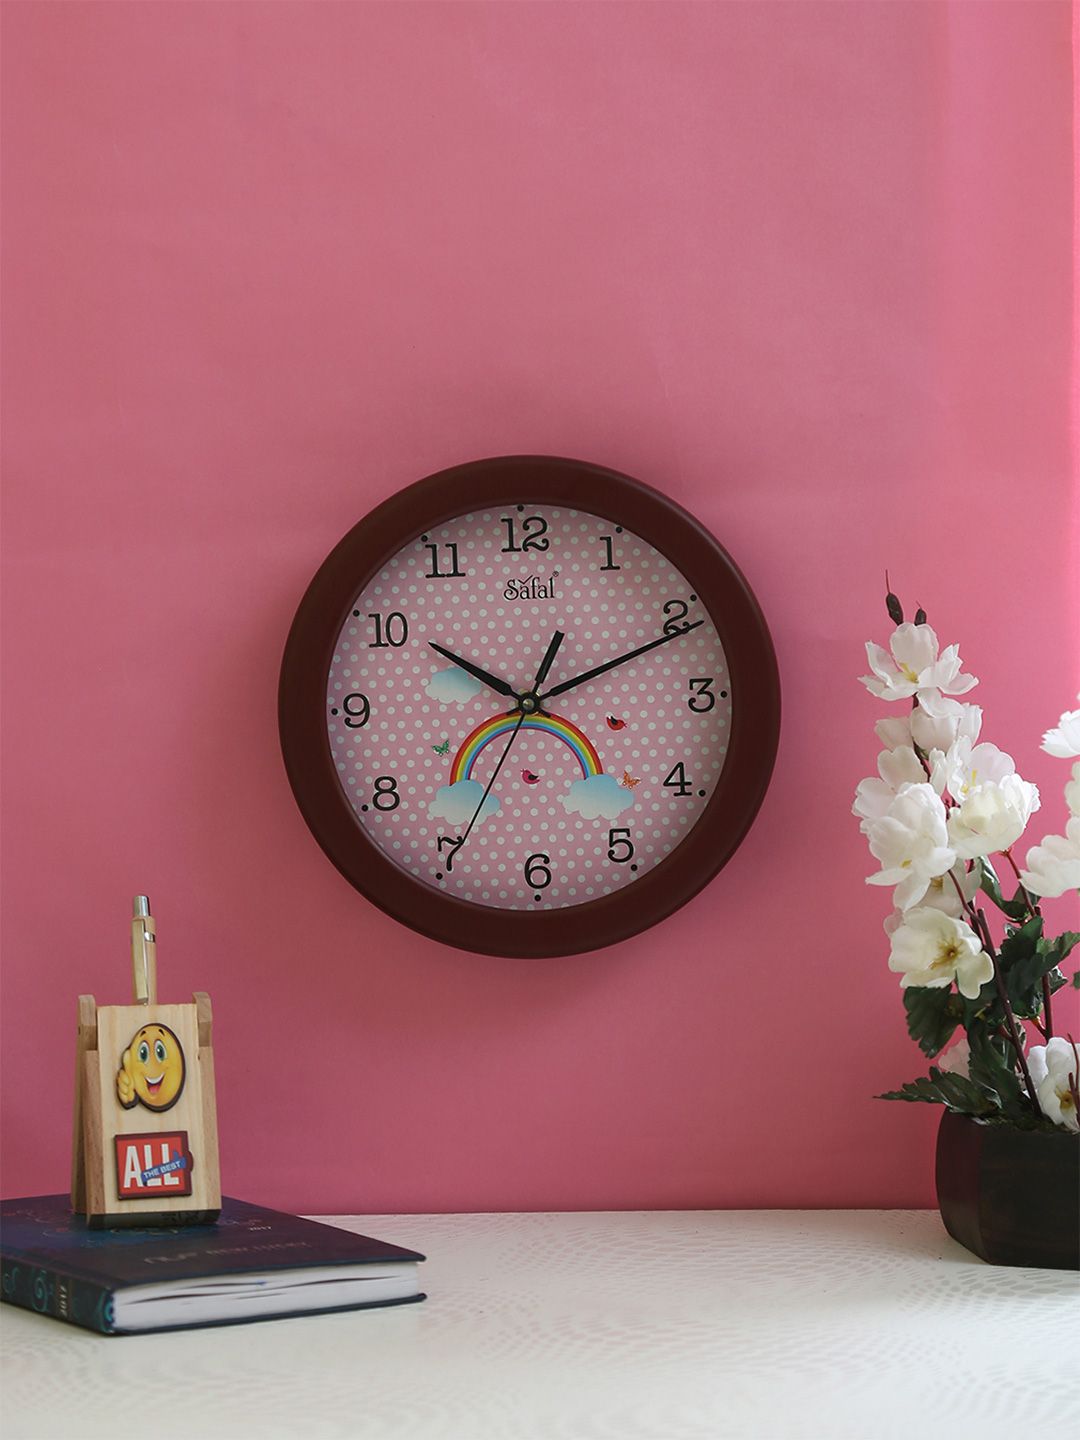 Safal Pink & Brown Round Analogue Wall Clock Price in India